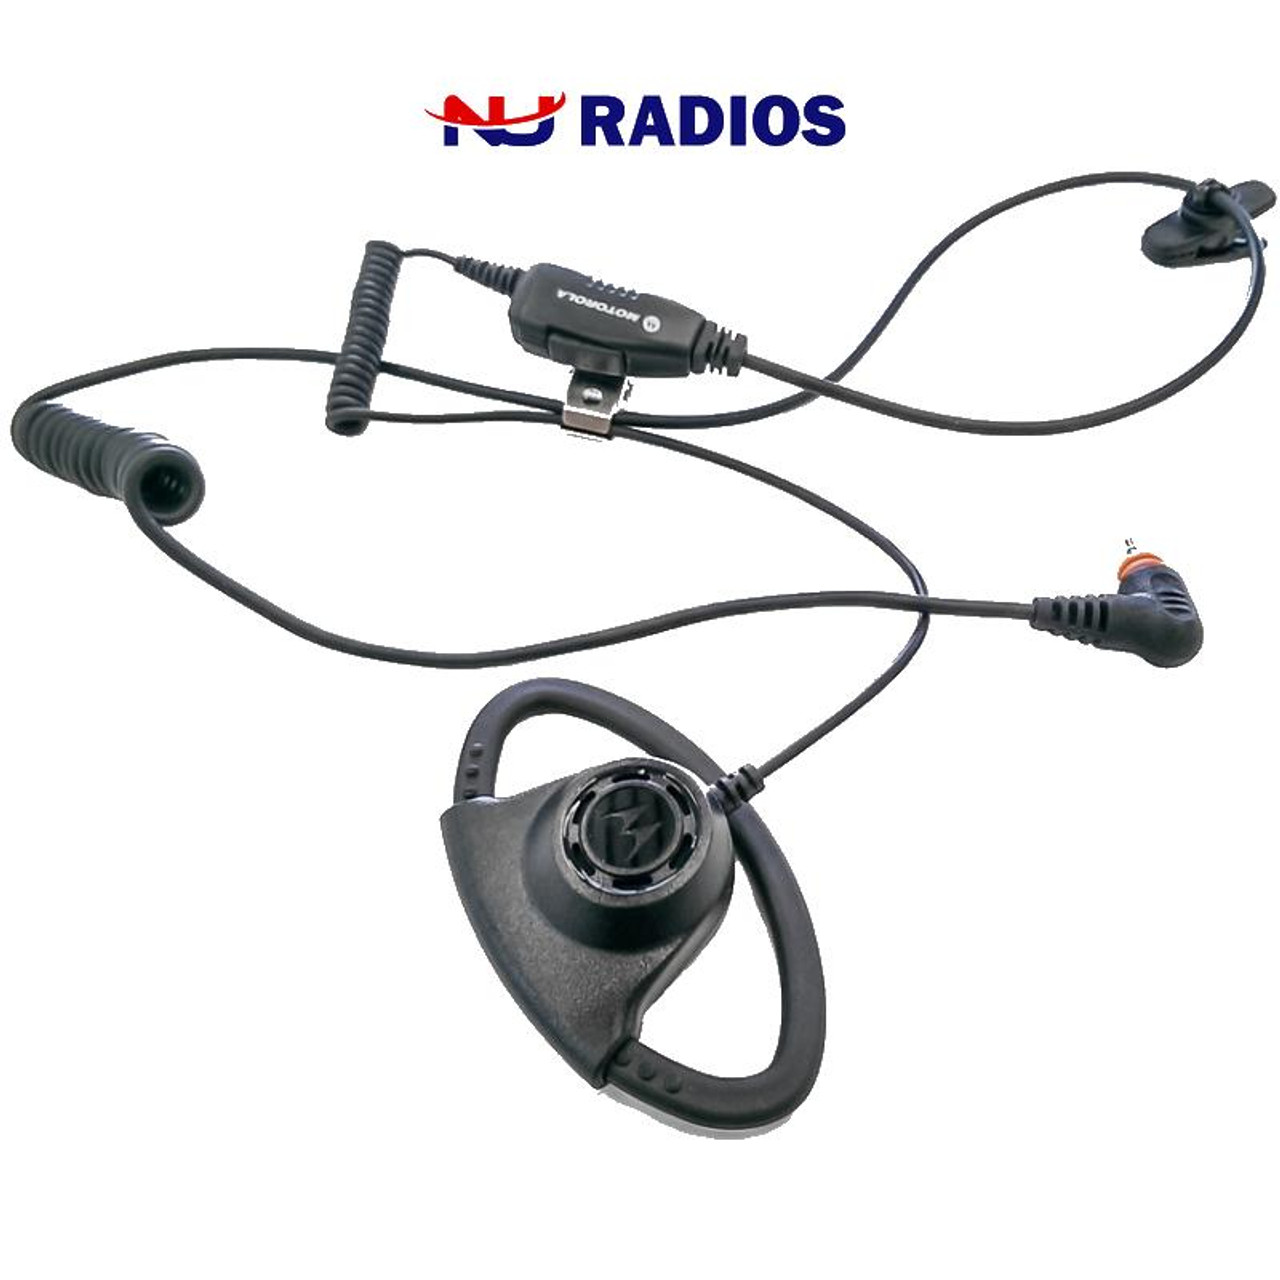 Six Pack of Motorola PMLN7159 Adjustable D-Style Earpieces In-Line PTT  Mic  for the TLK100 and SL300 series radios. A must have for the business on the  go.